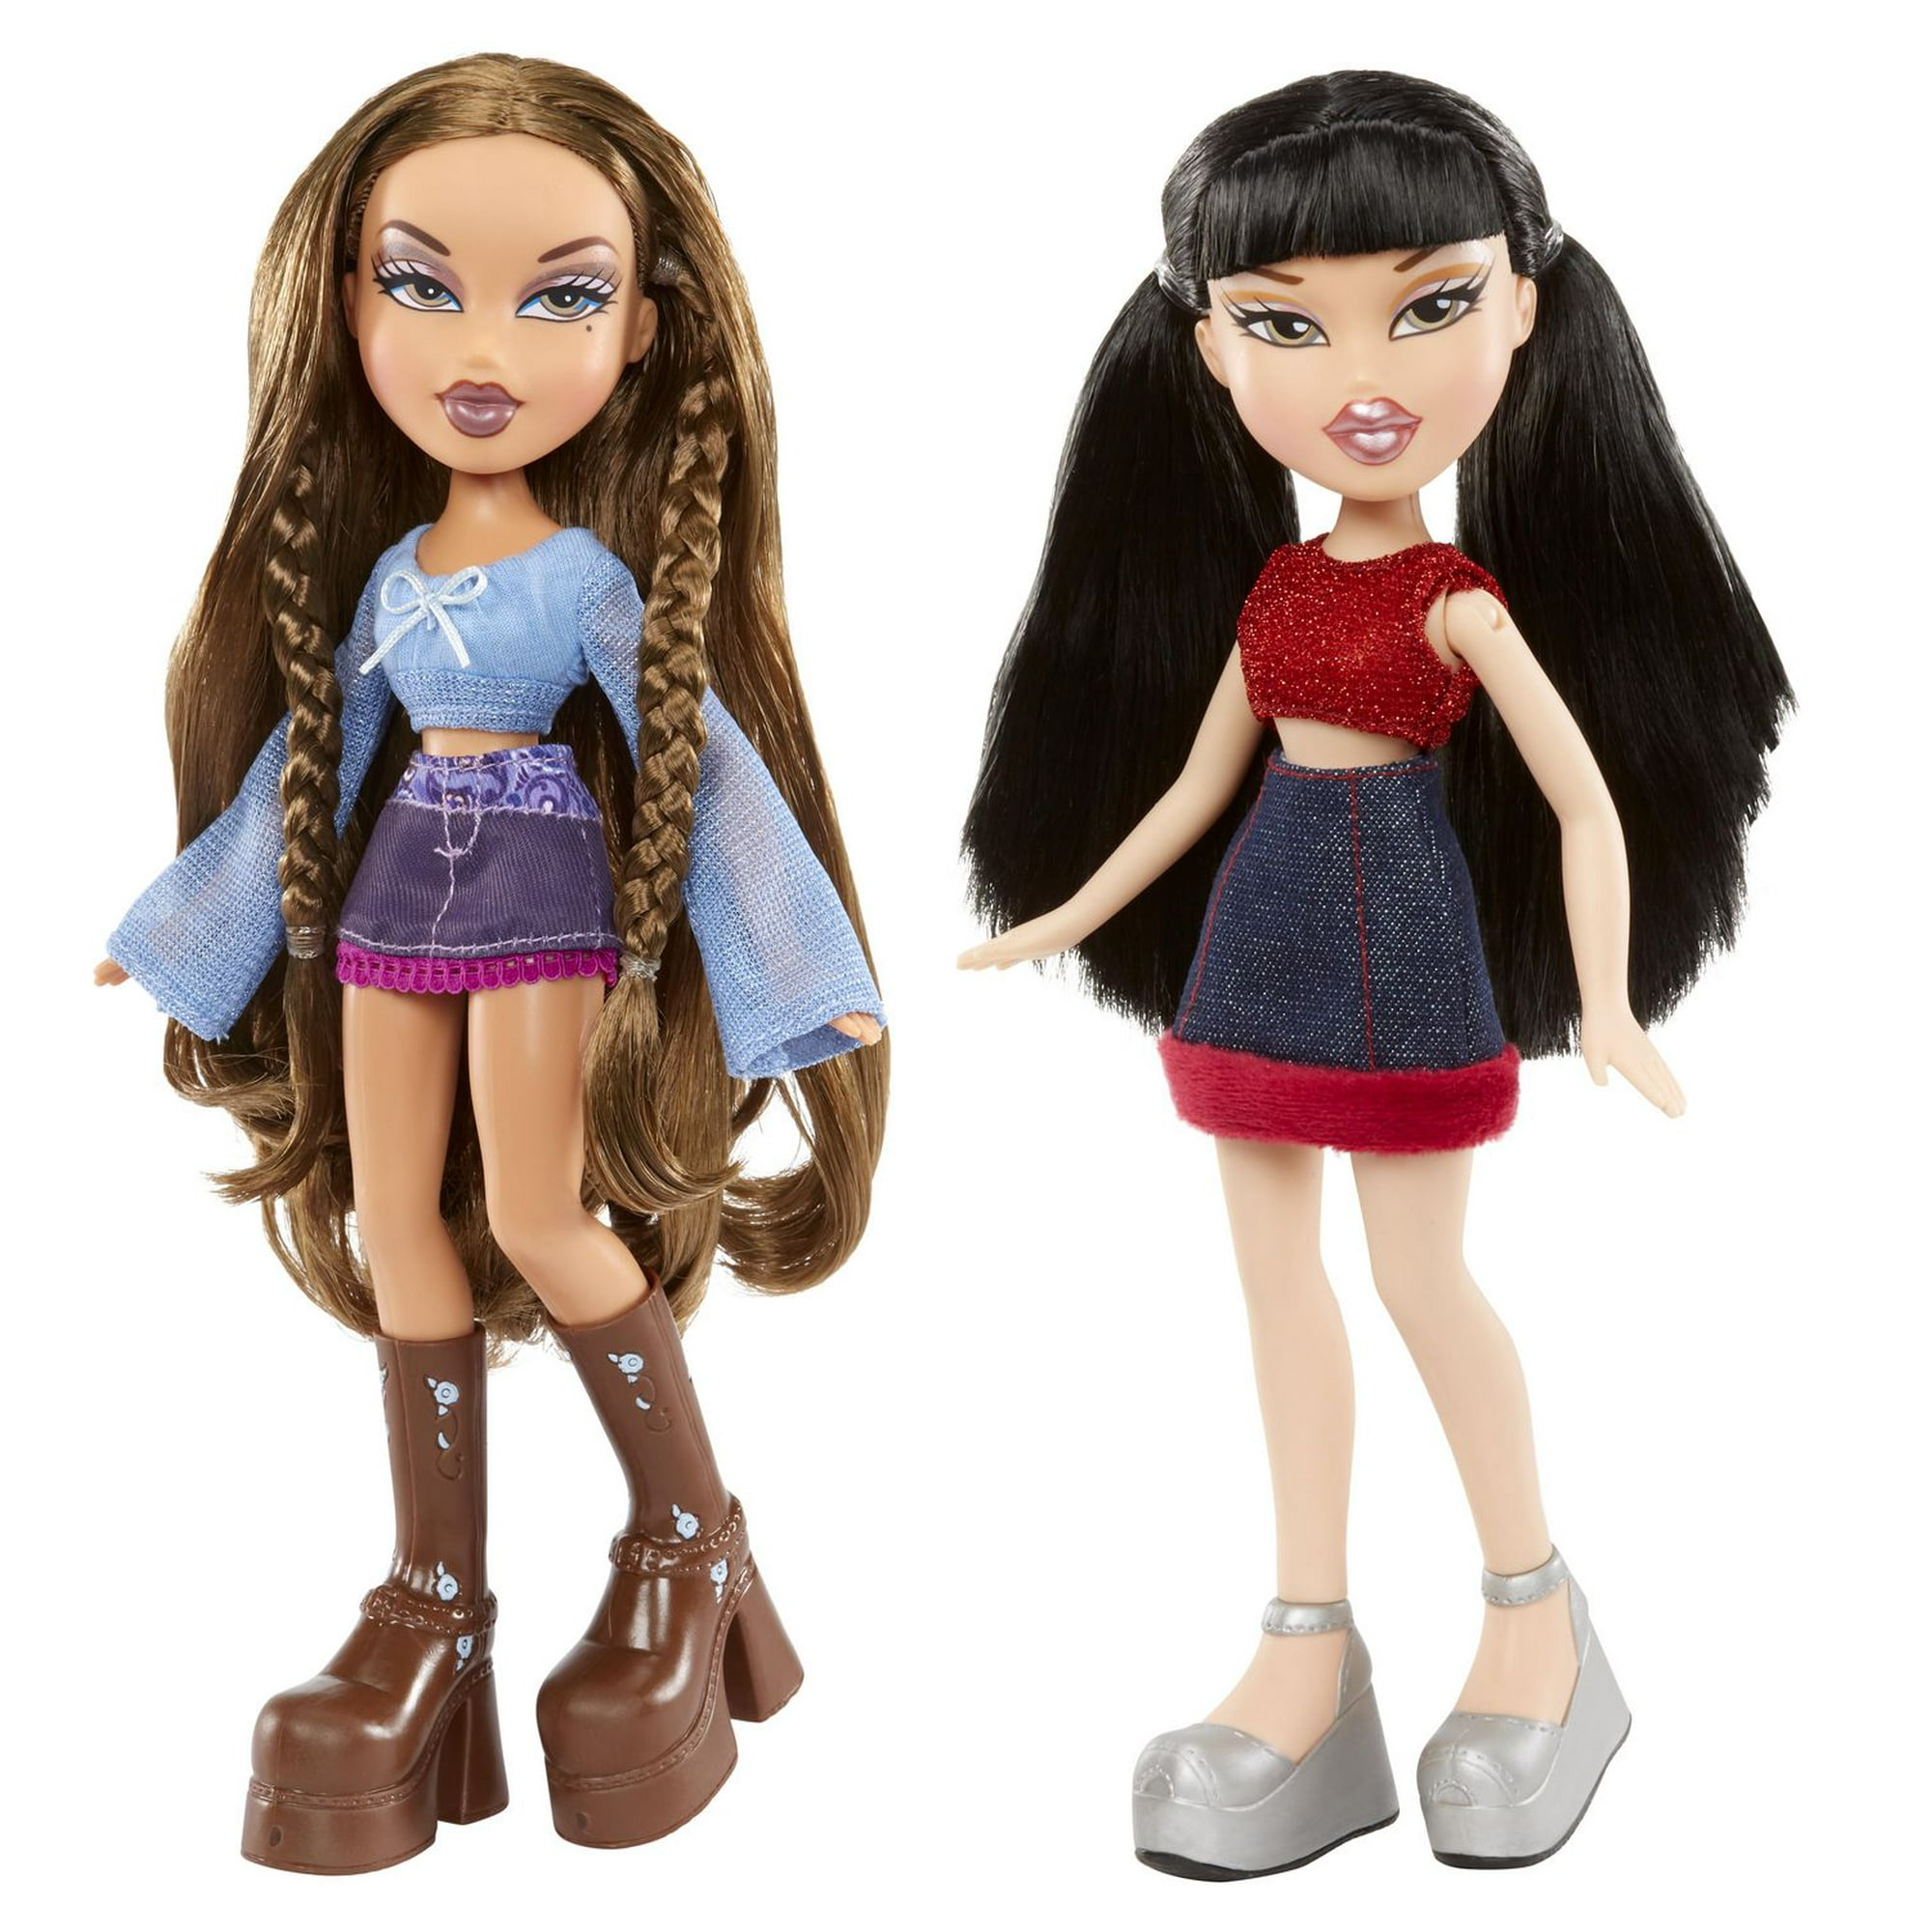 Bratz Magic Hair Yasmin Doll with Instructions and Accessories